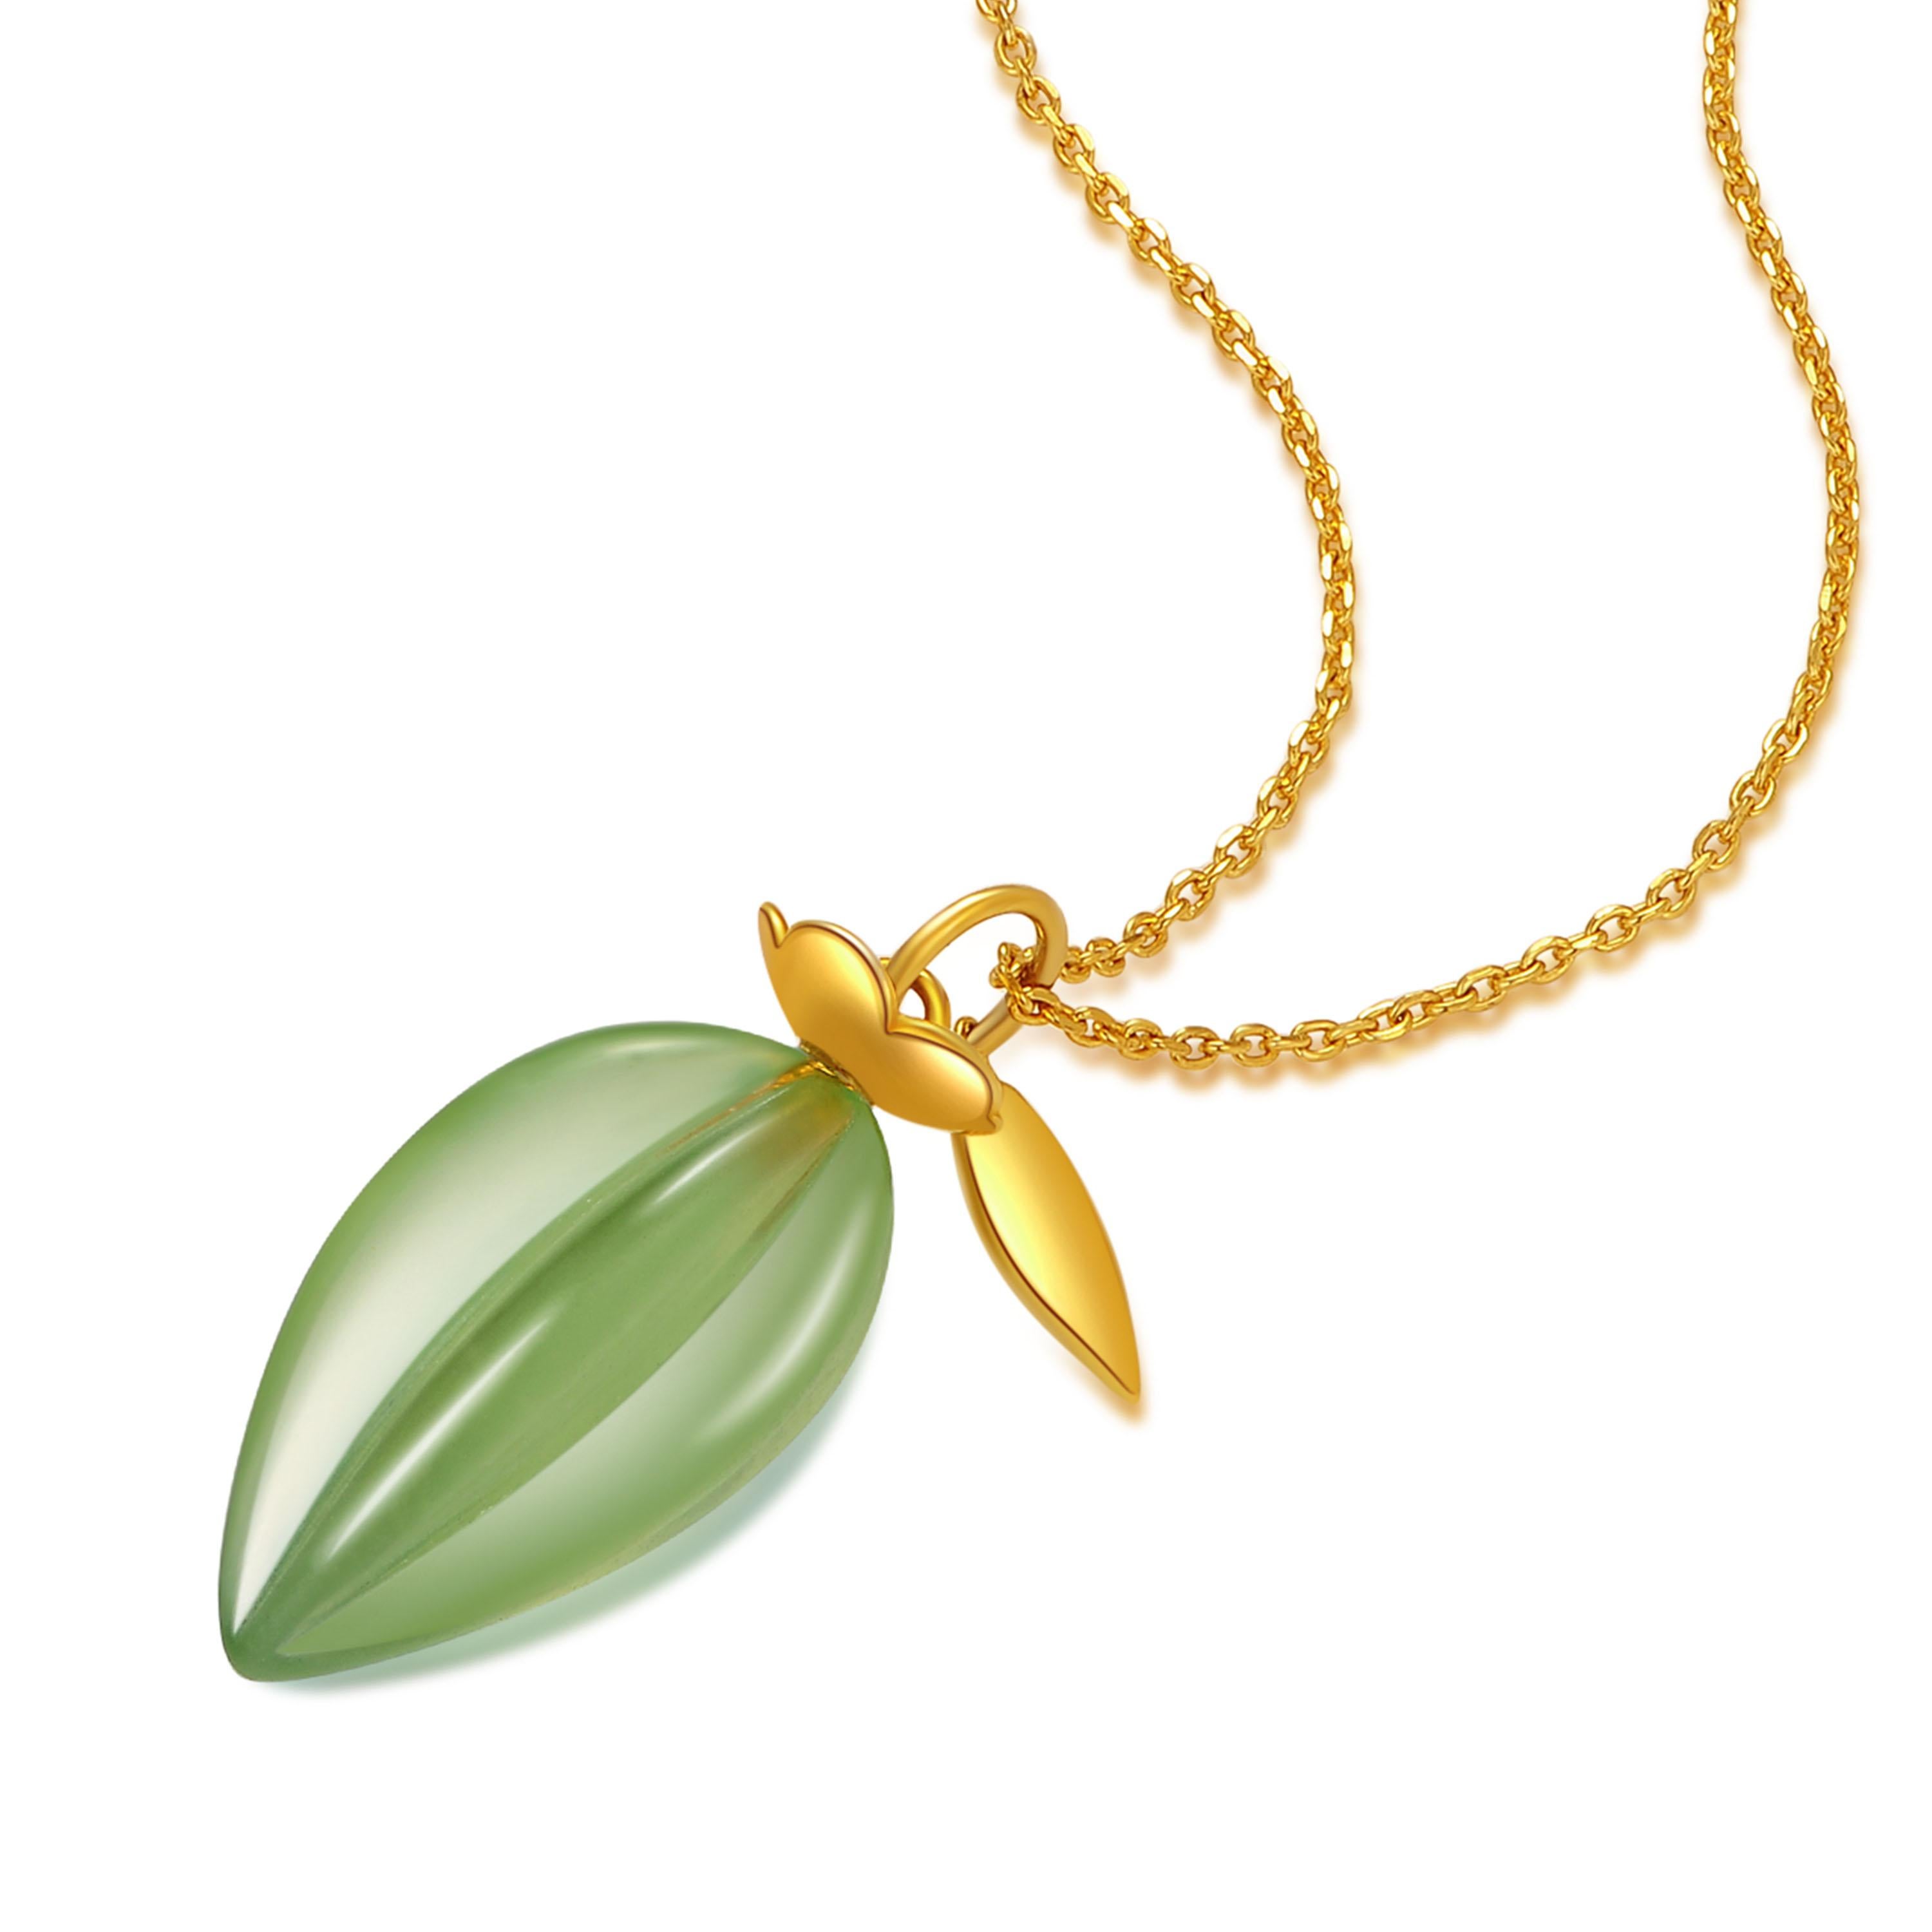 Description:
A charming pendant featuring serpentine jade shaped like the tropical star fruit, adorned with delicate petals of 18ct gold plate on sterling silver.

Specification:
Size (LxW): 25mm x 11mm
Weight per earring: 4.9gm
Stones: serpentine